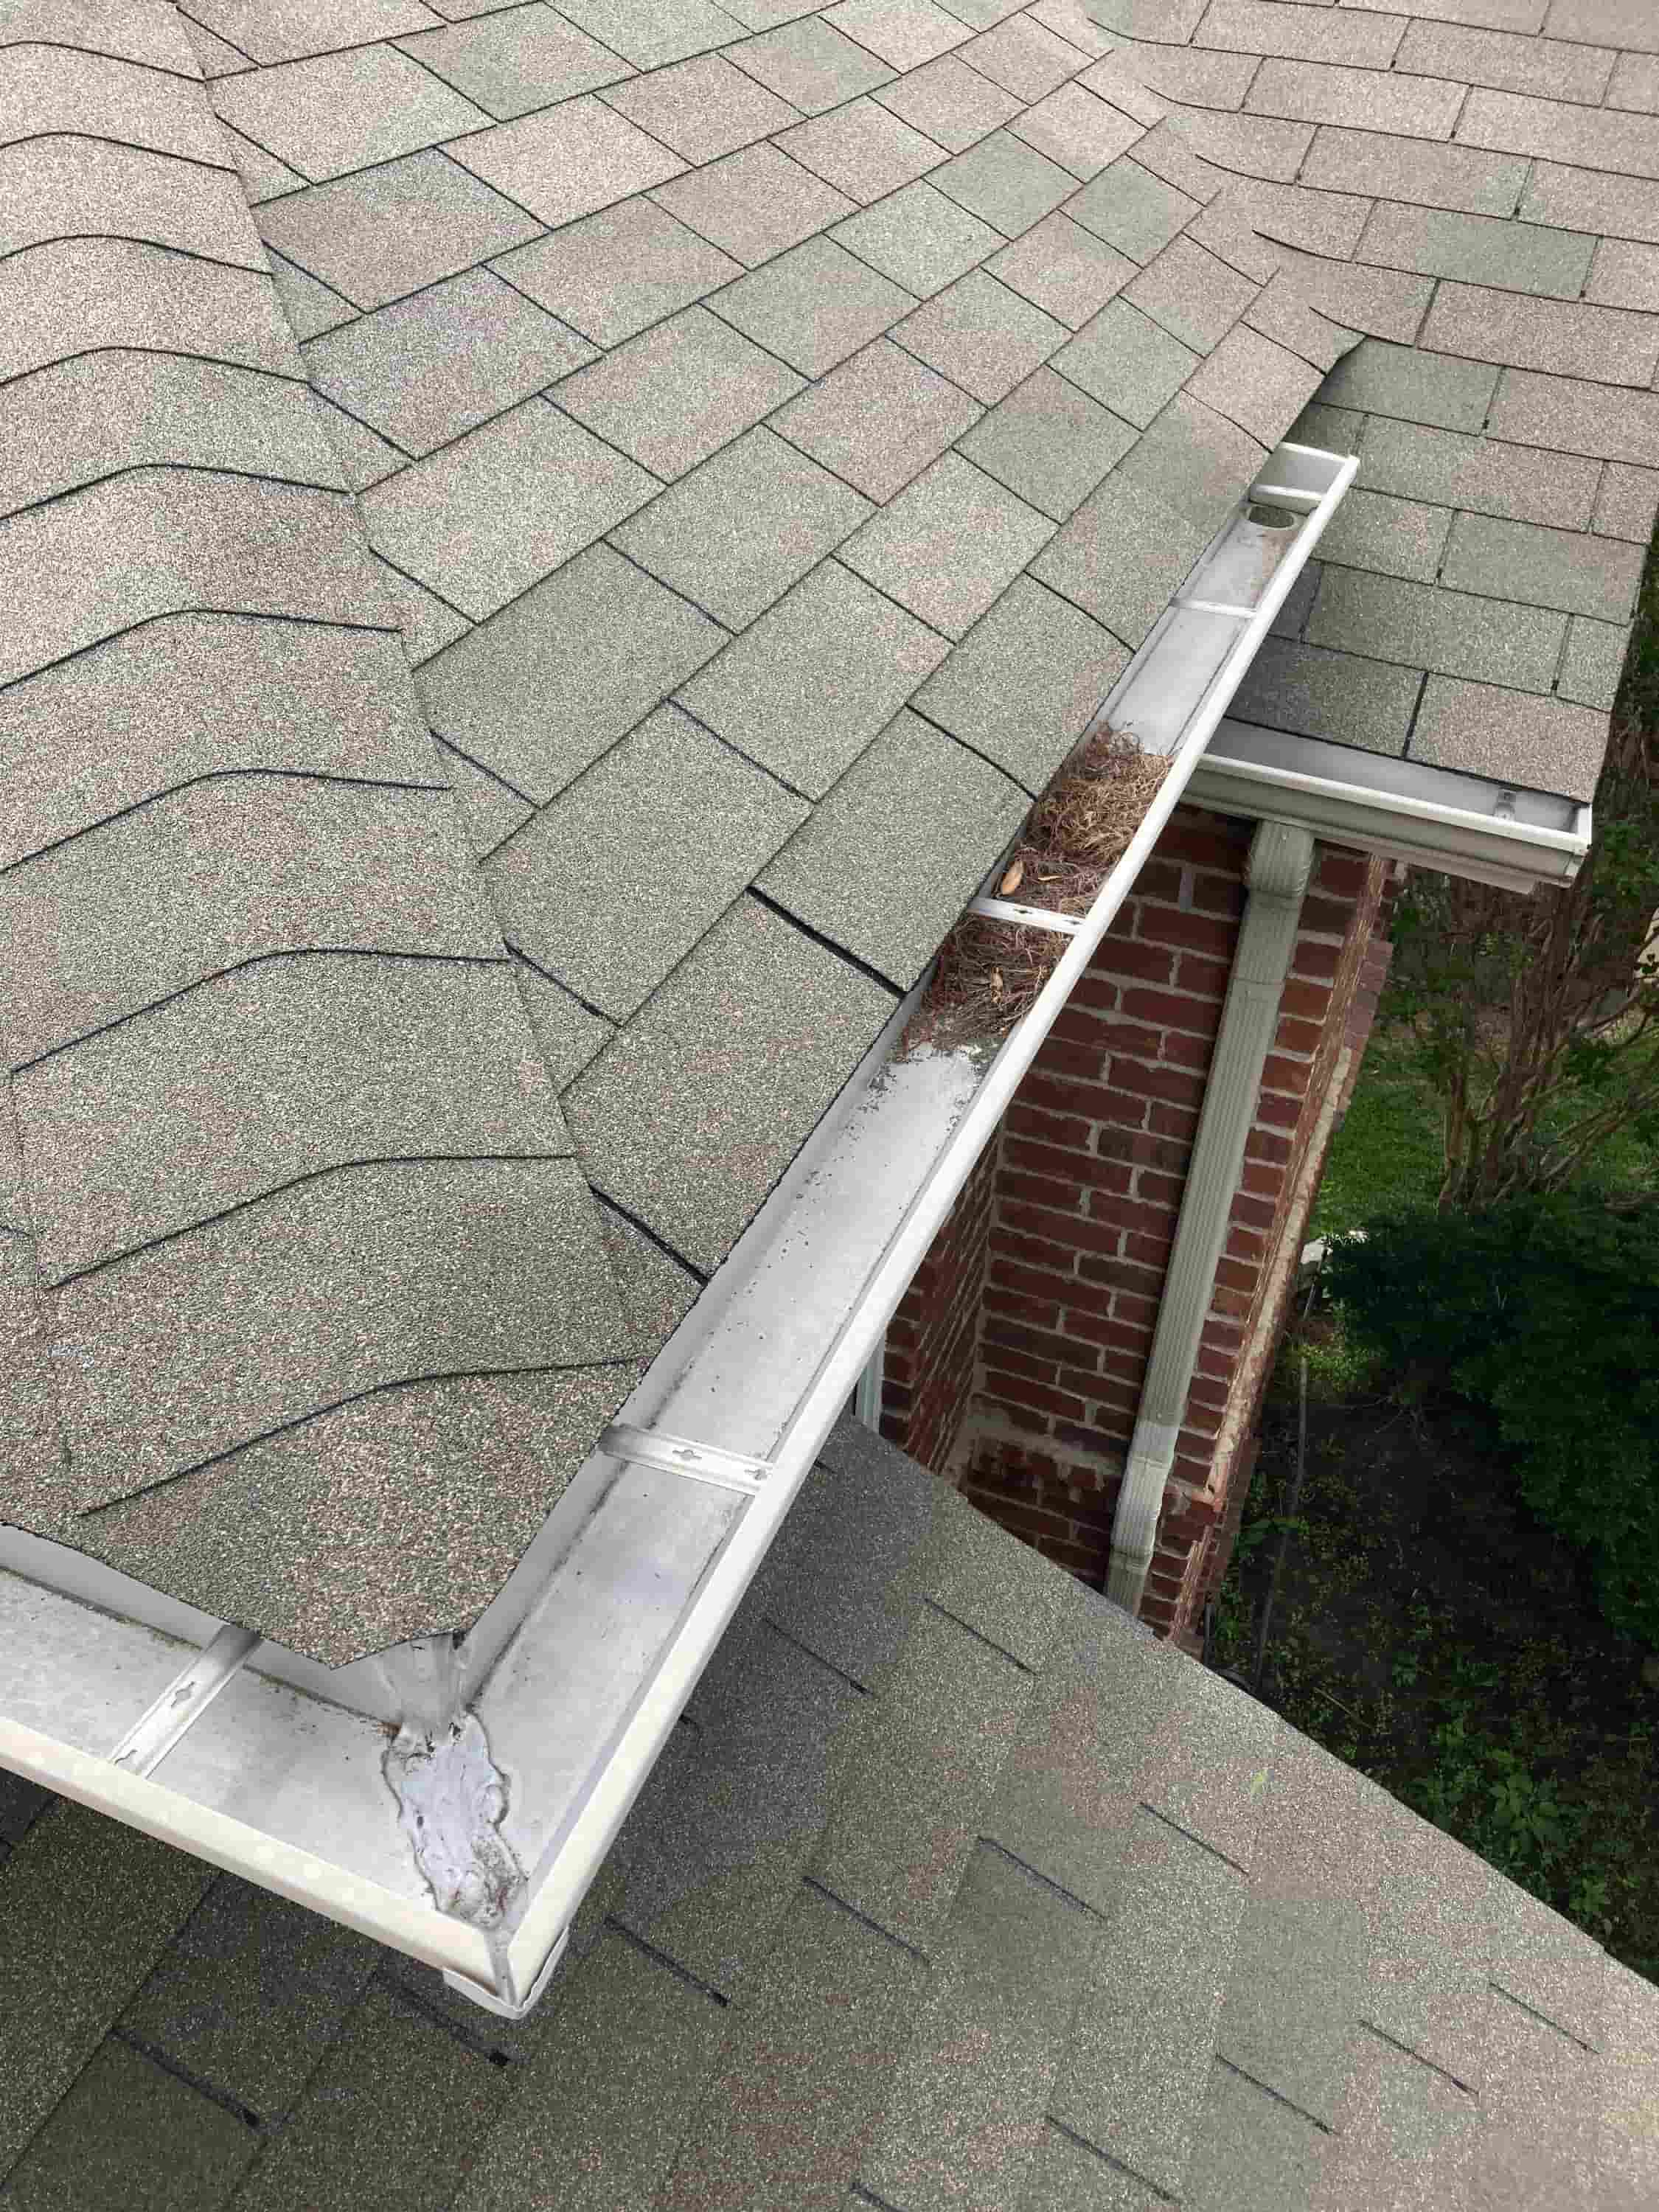 cleaning out gutters